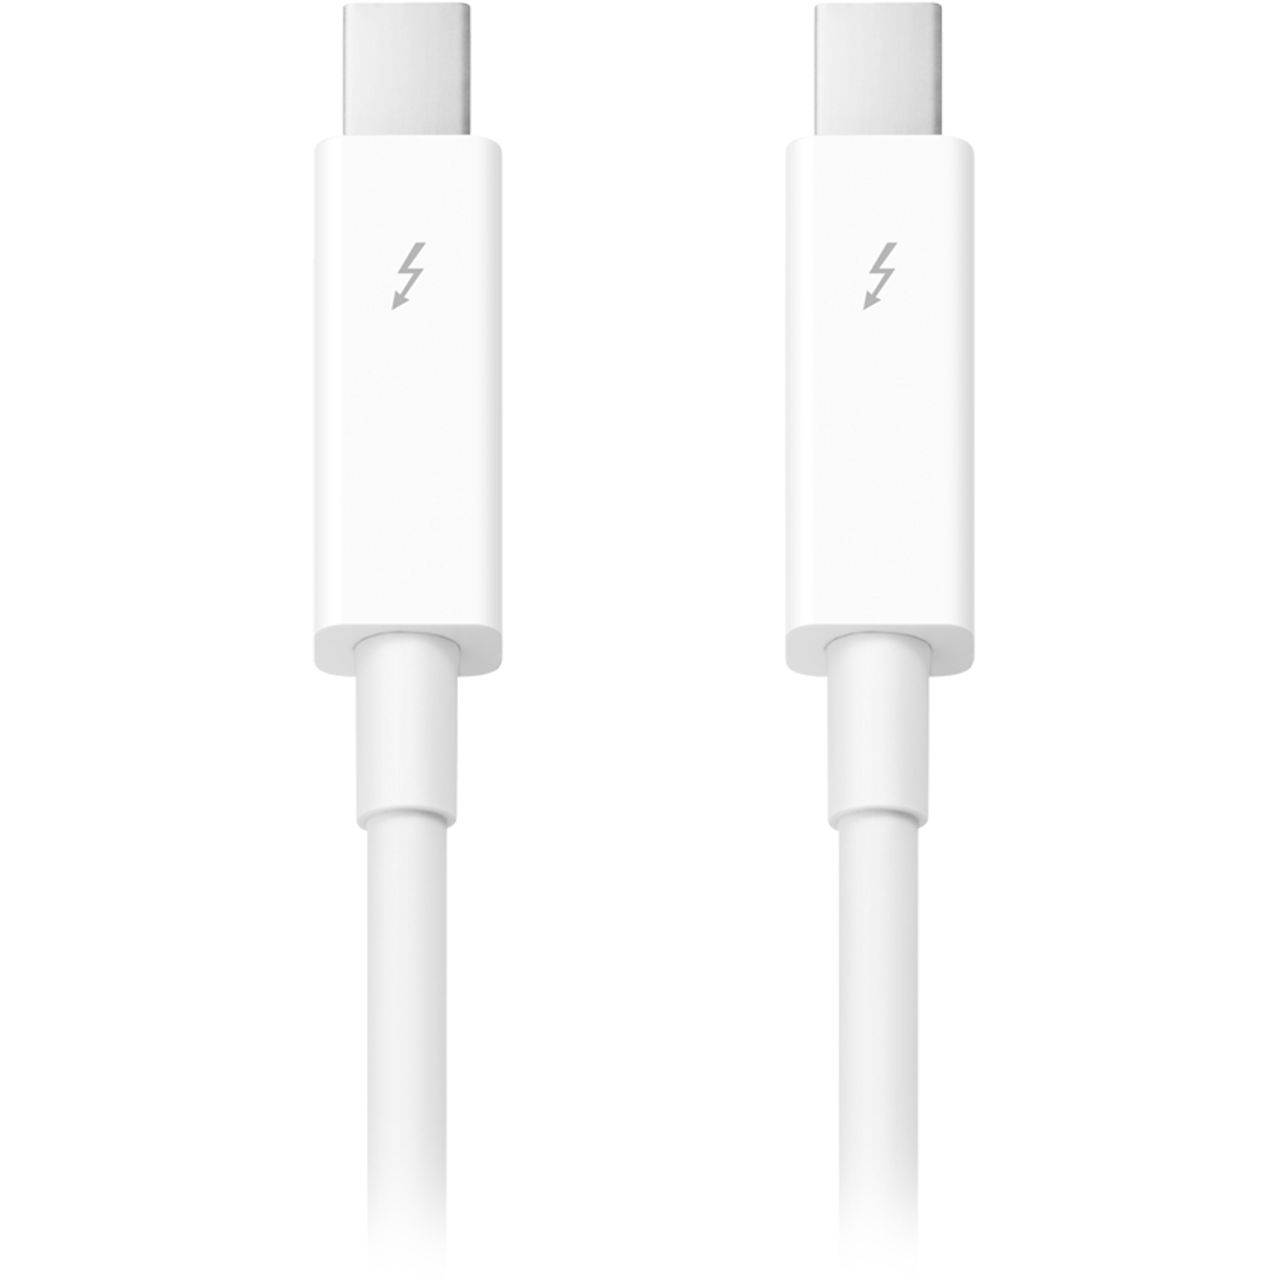 Apple Thunderbolt Cable (2m) Review